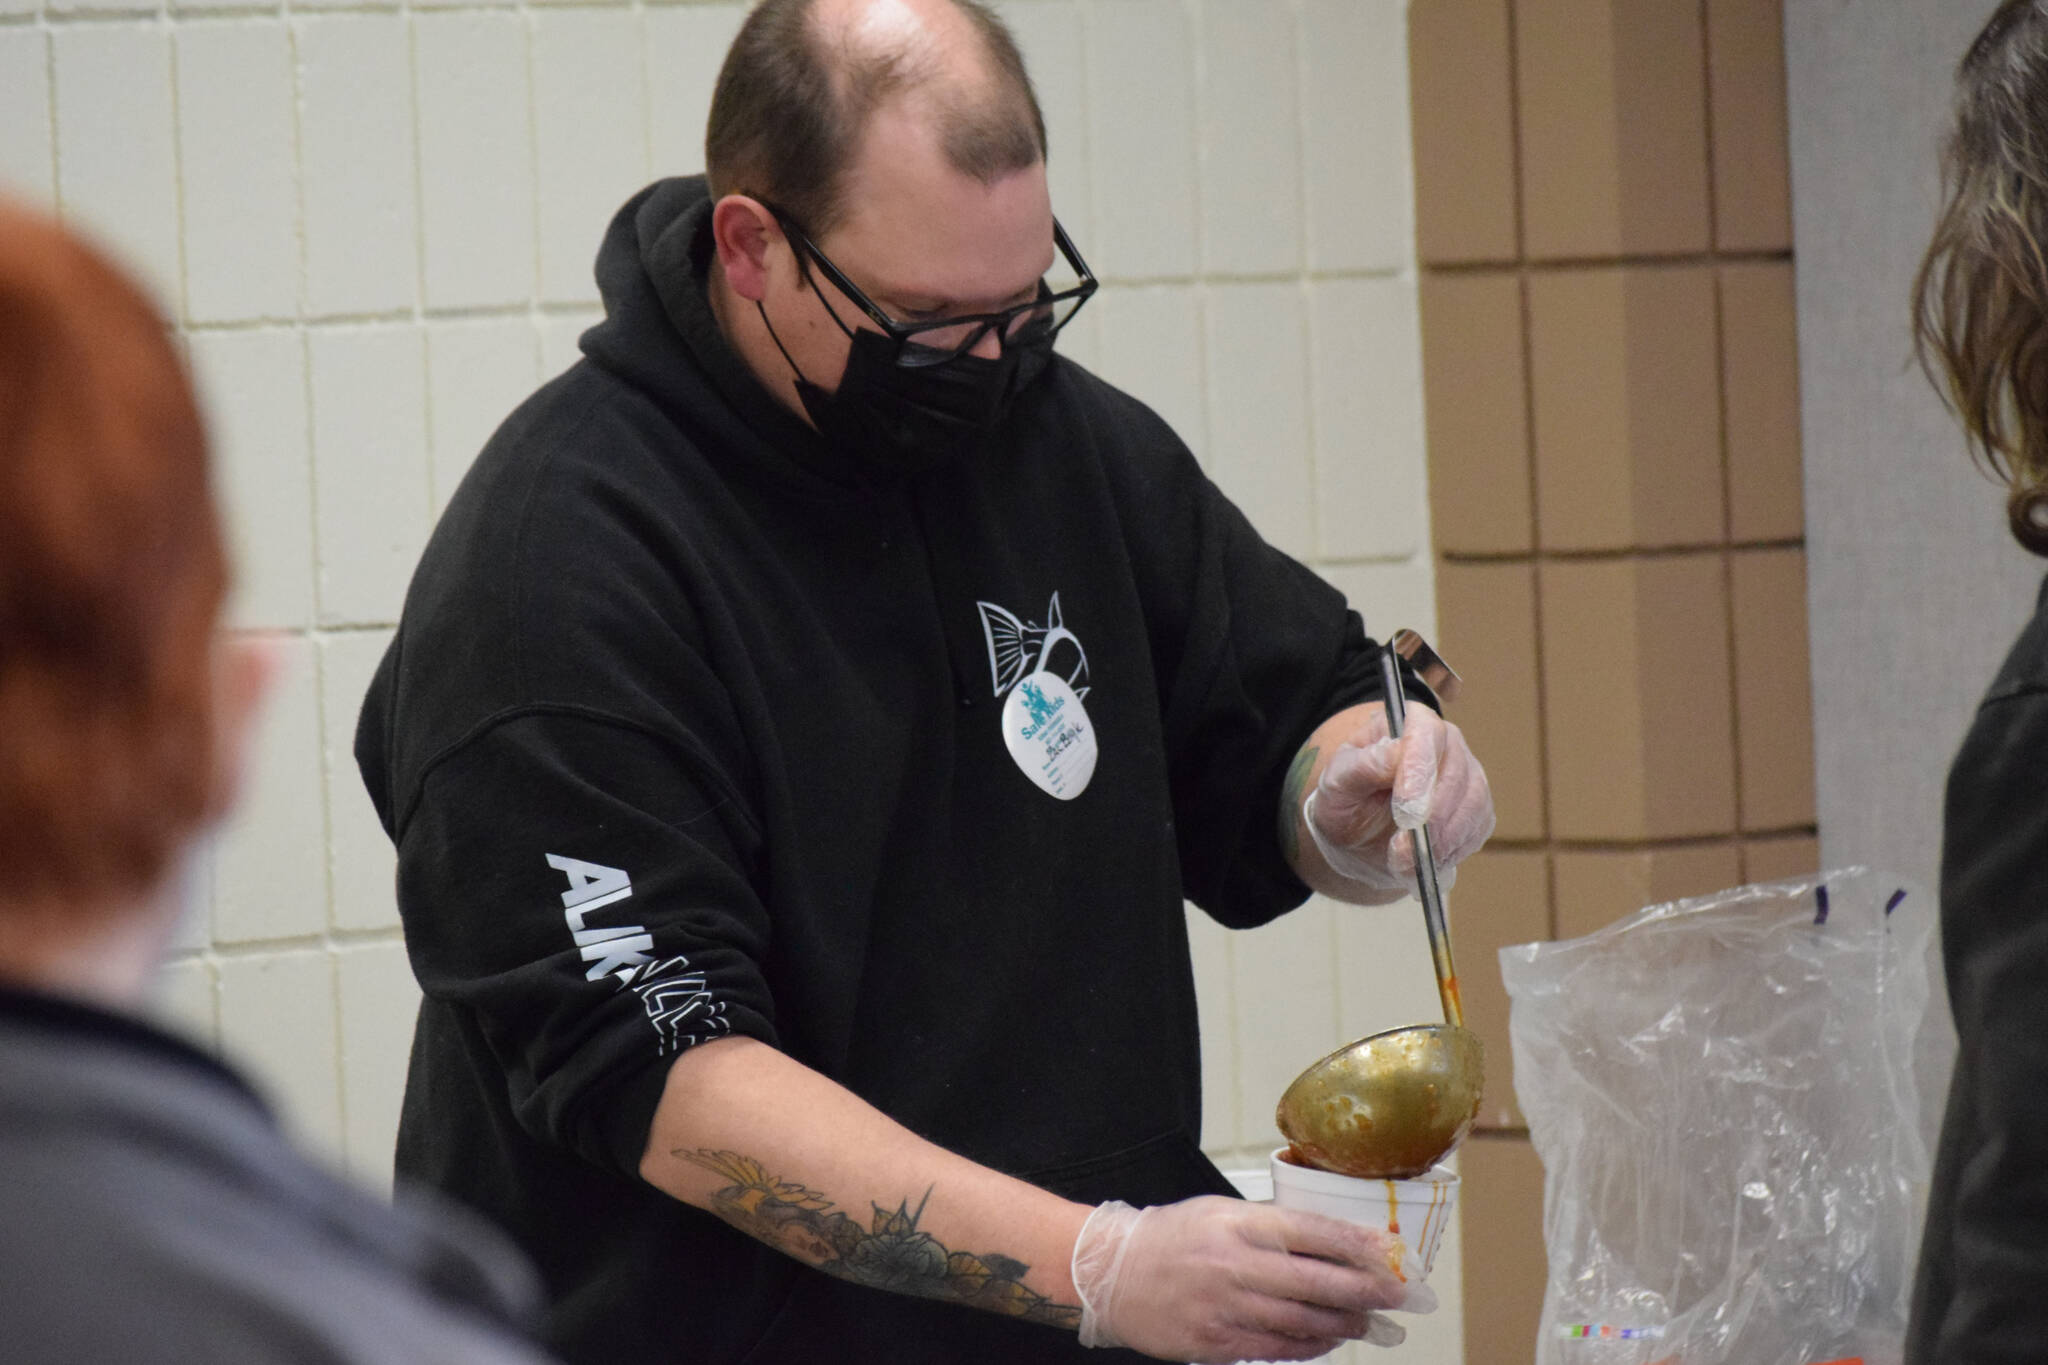 University of Alaska Anchorage human services intern Zachary Boyle serves lunch during the Project Homeless Connect event Soldotna Regional Sports Complex in Soldotna on Wednesday, Jan. 26, 2022. (Camille Botello/Peninsula Clarion)